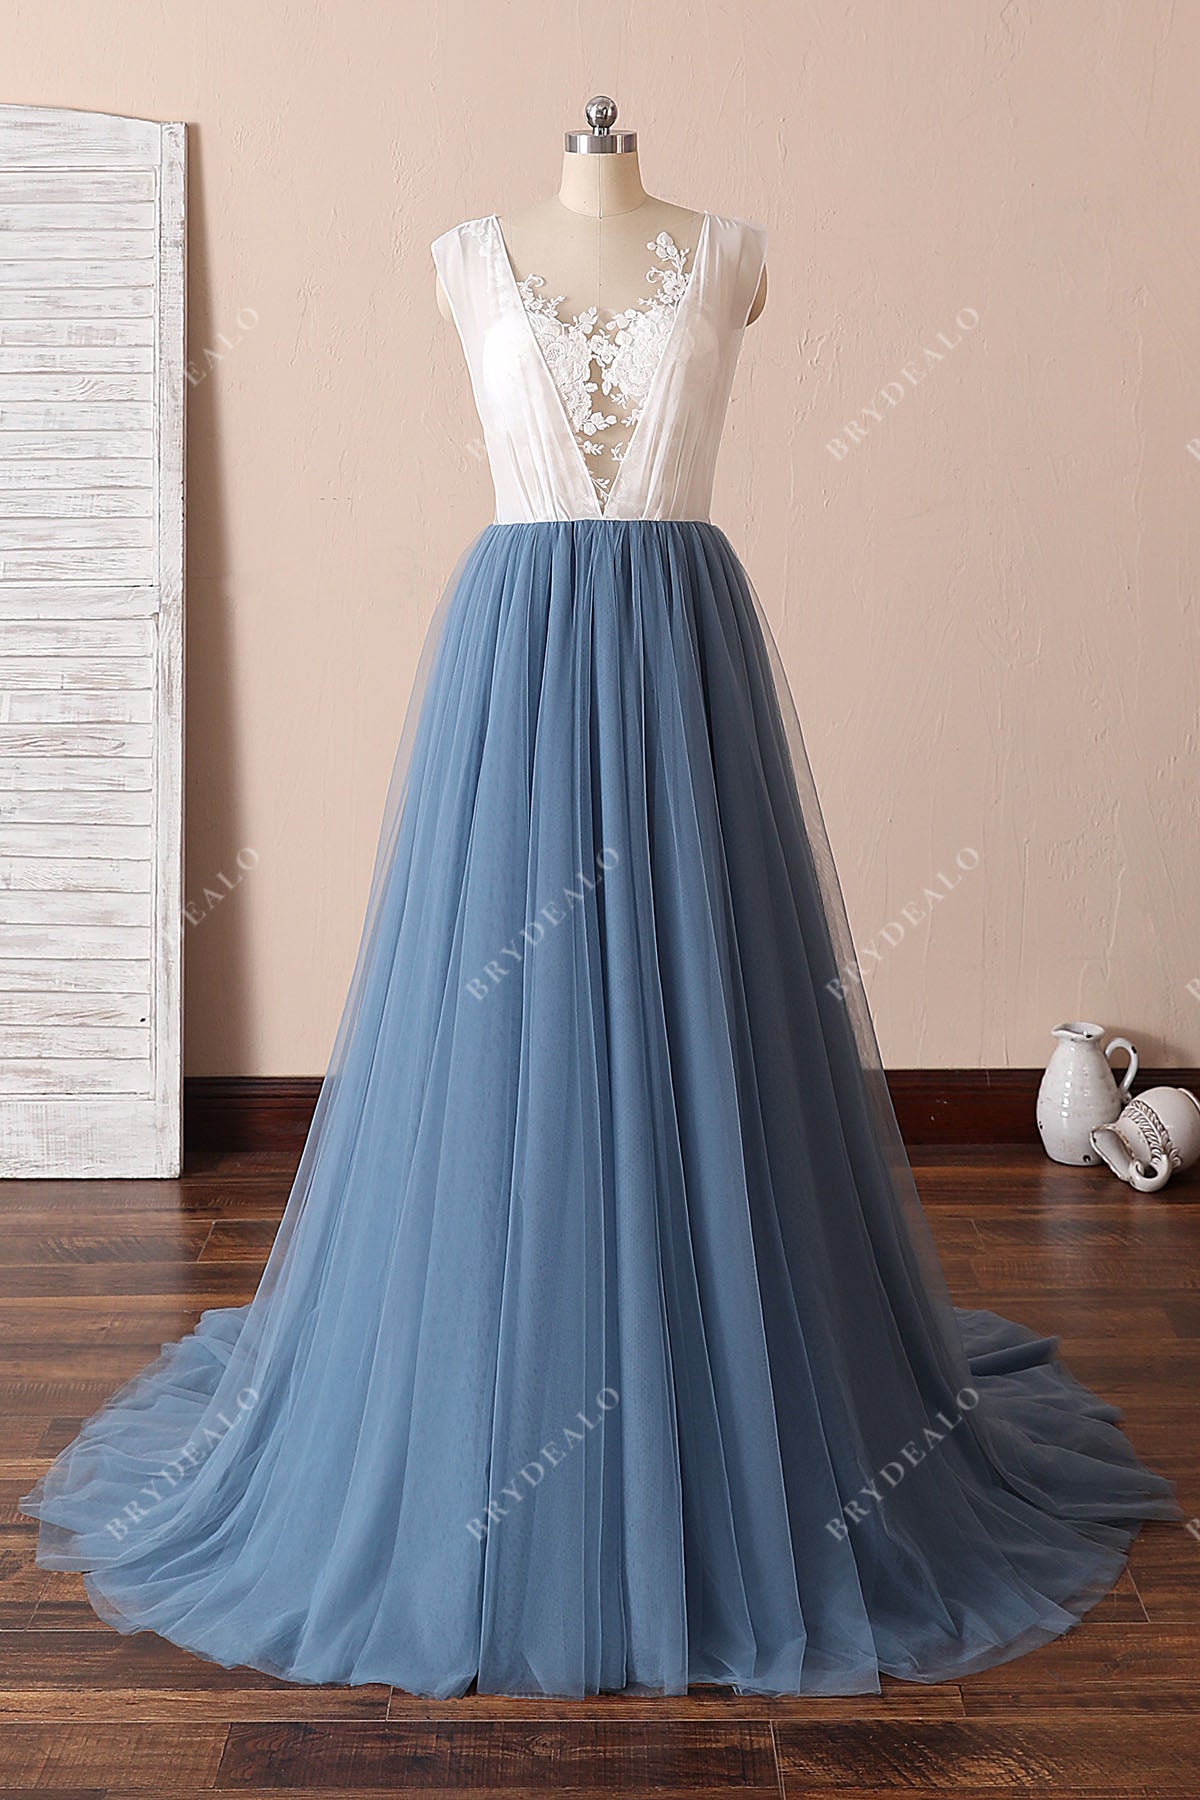 classy two-tone illusion ivory lace dusty blue tulle wedding dress